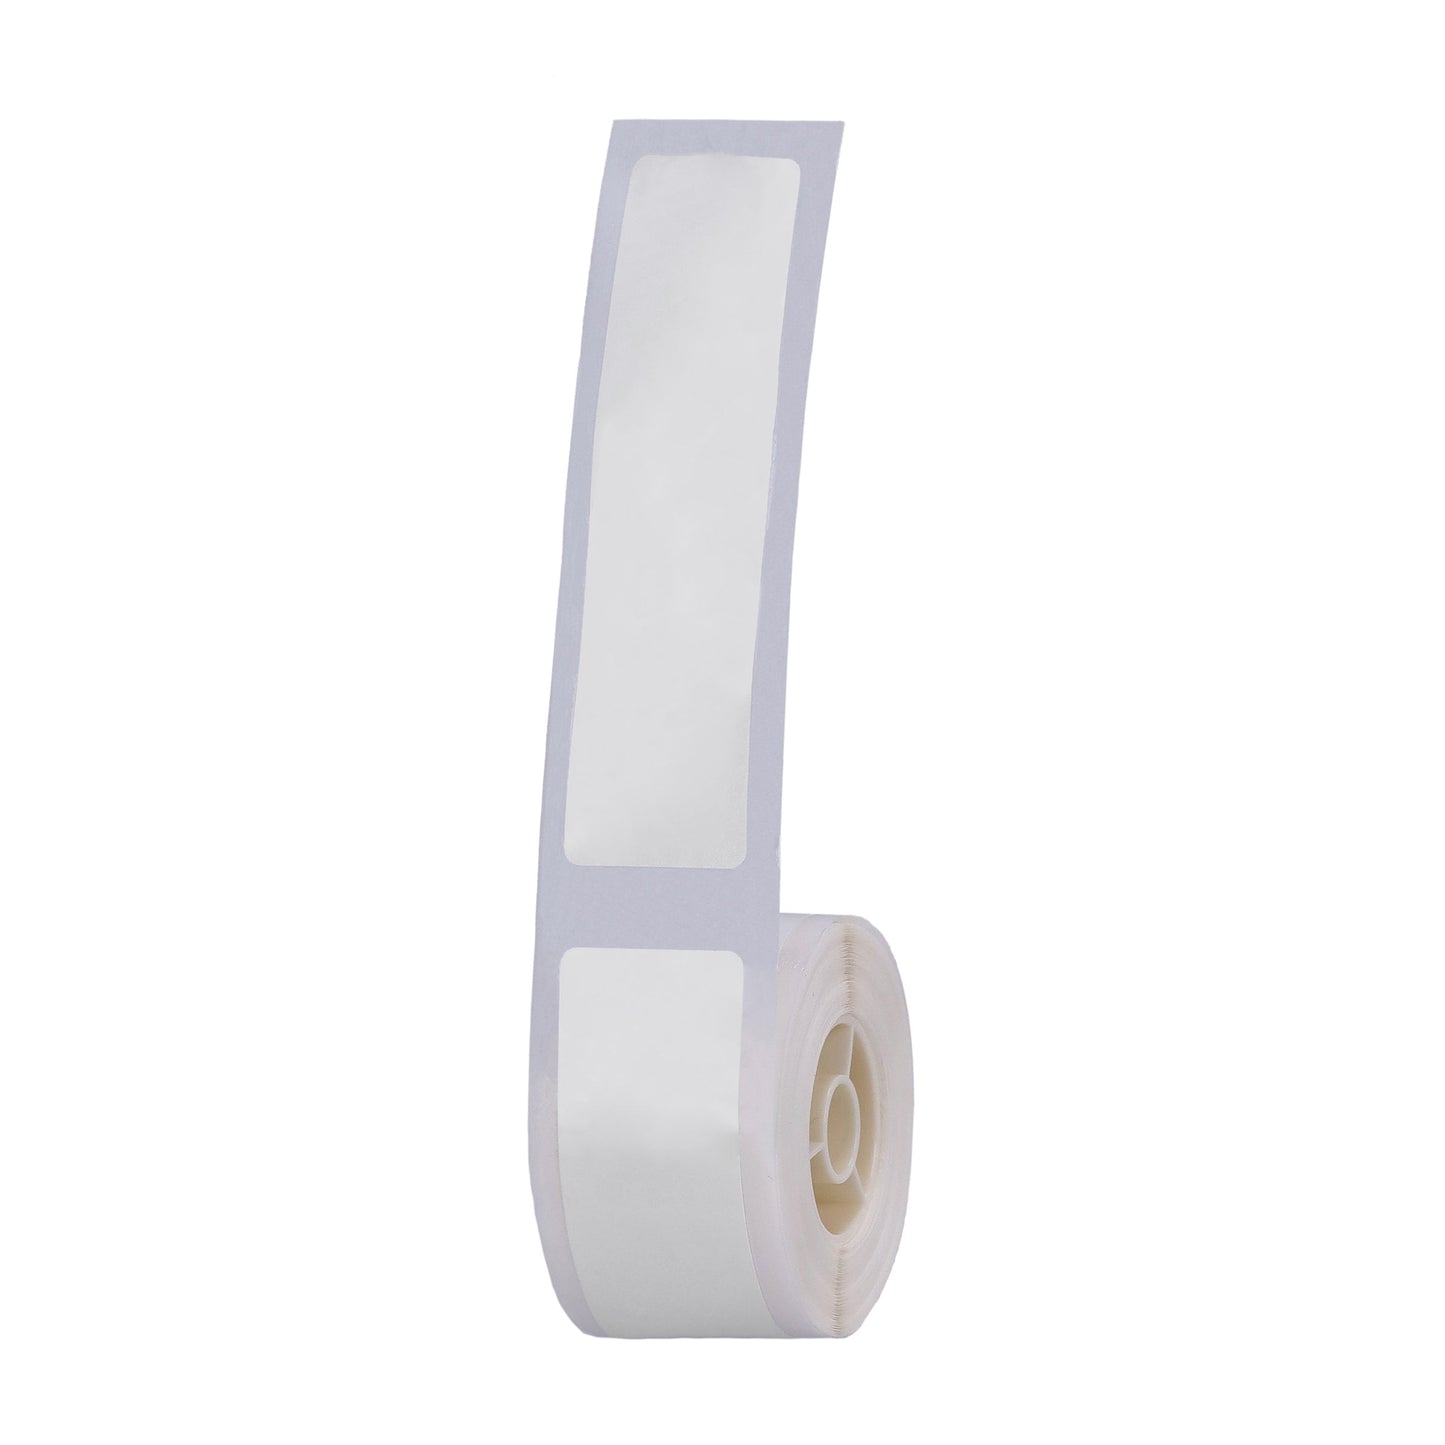 NIIMBOT - D101 ONLY - R20*75 - 90 LABELS PER ROLL - WHITE